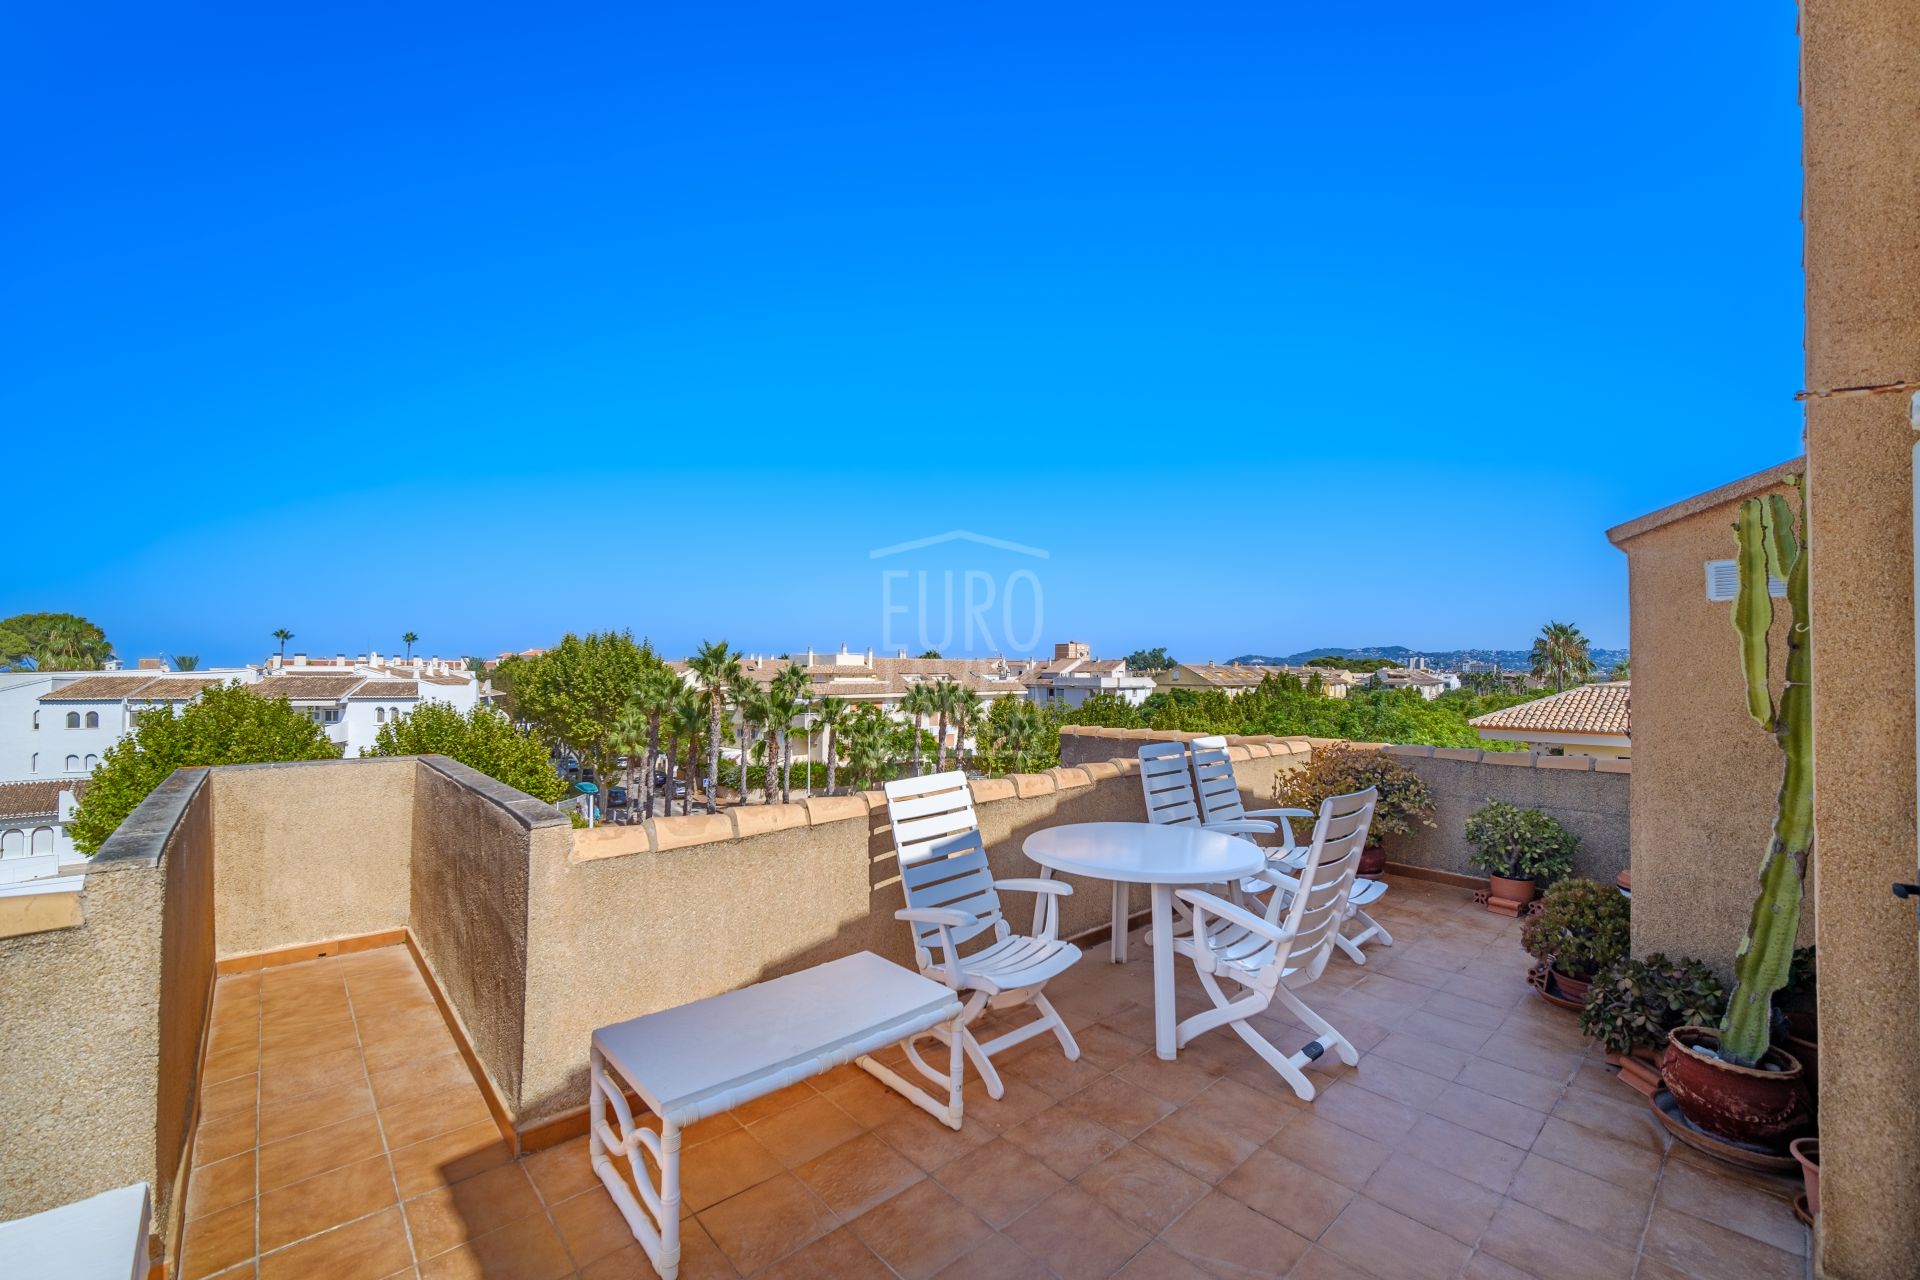 Penthouse for sale exclusively with Eurojavea close to the port of Jávea.